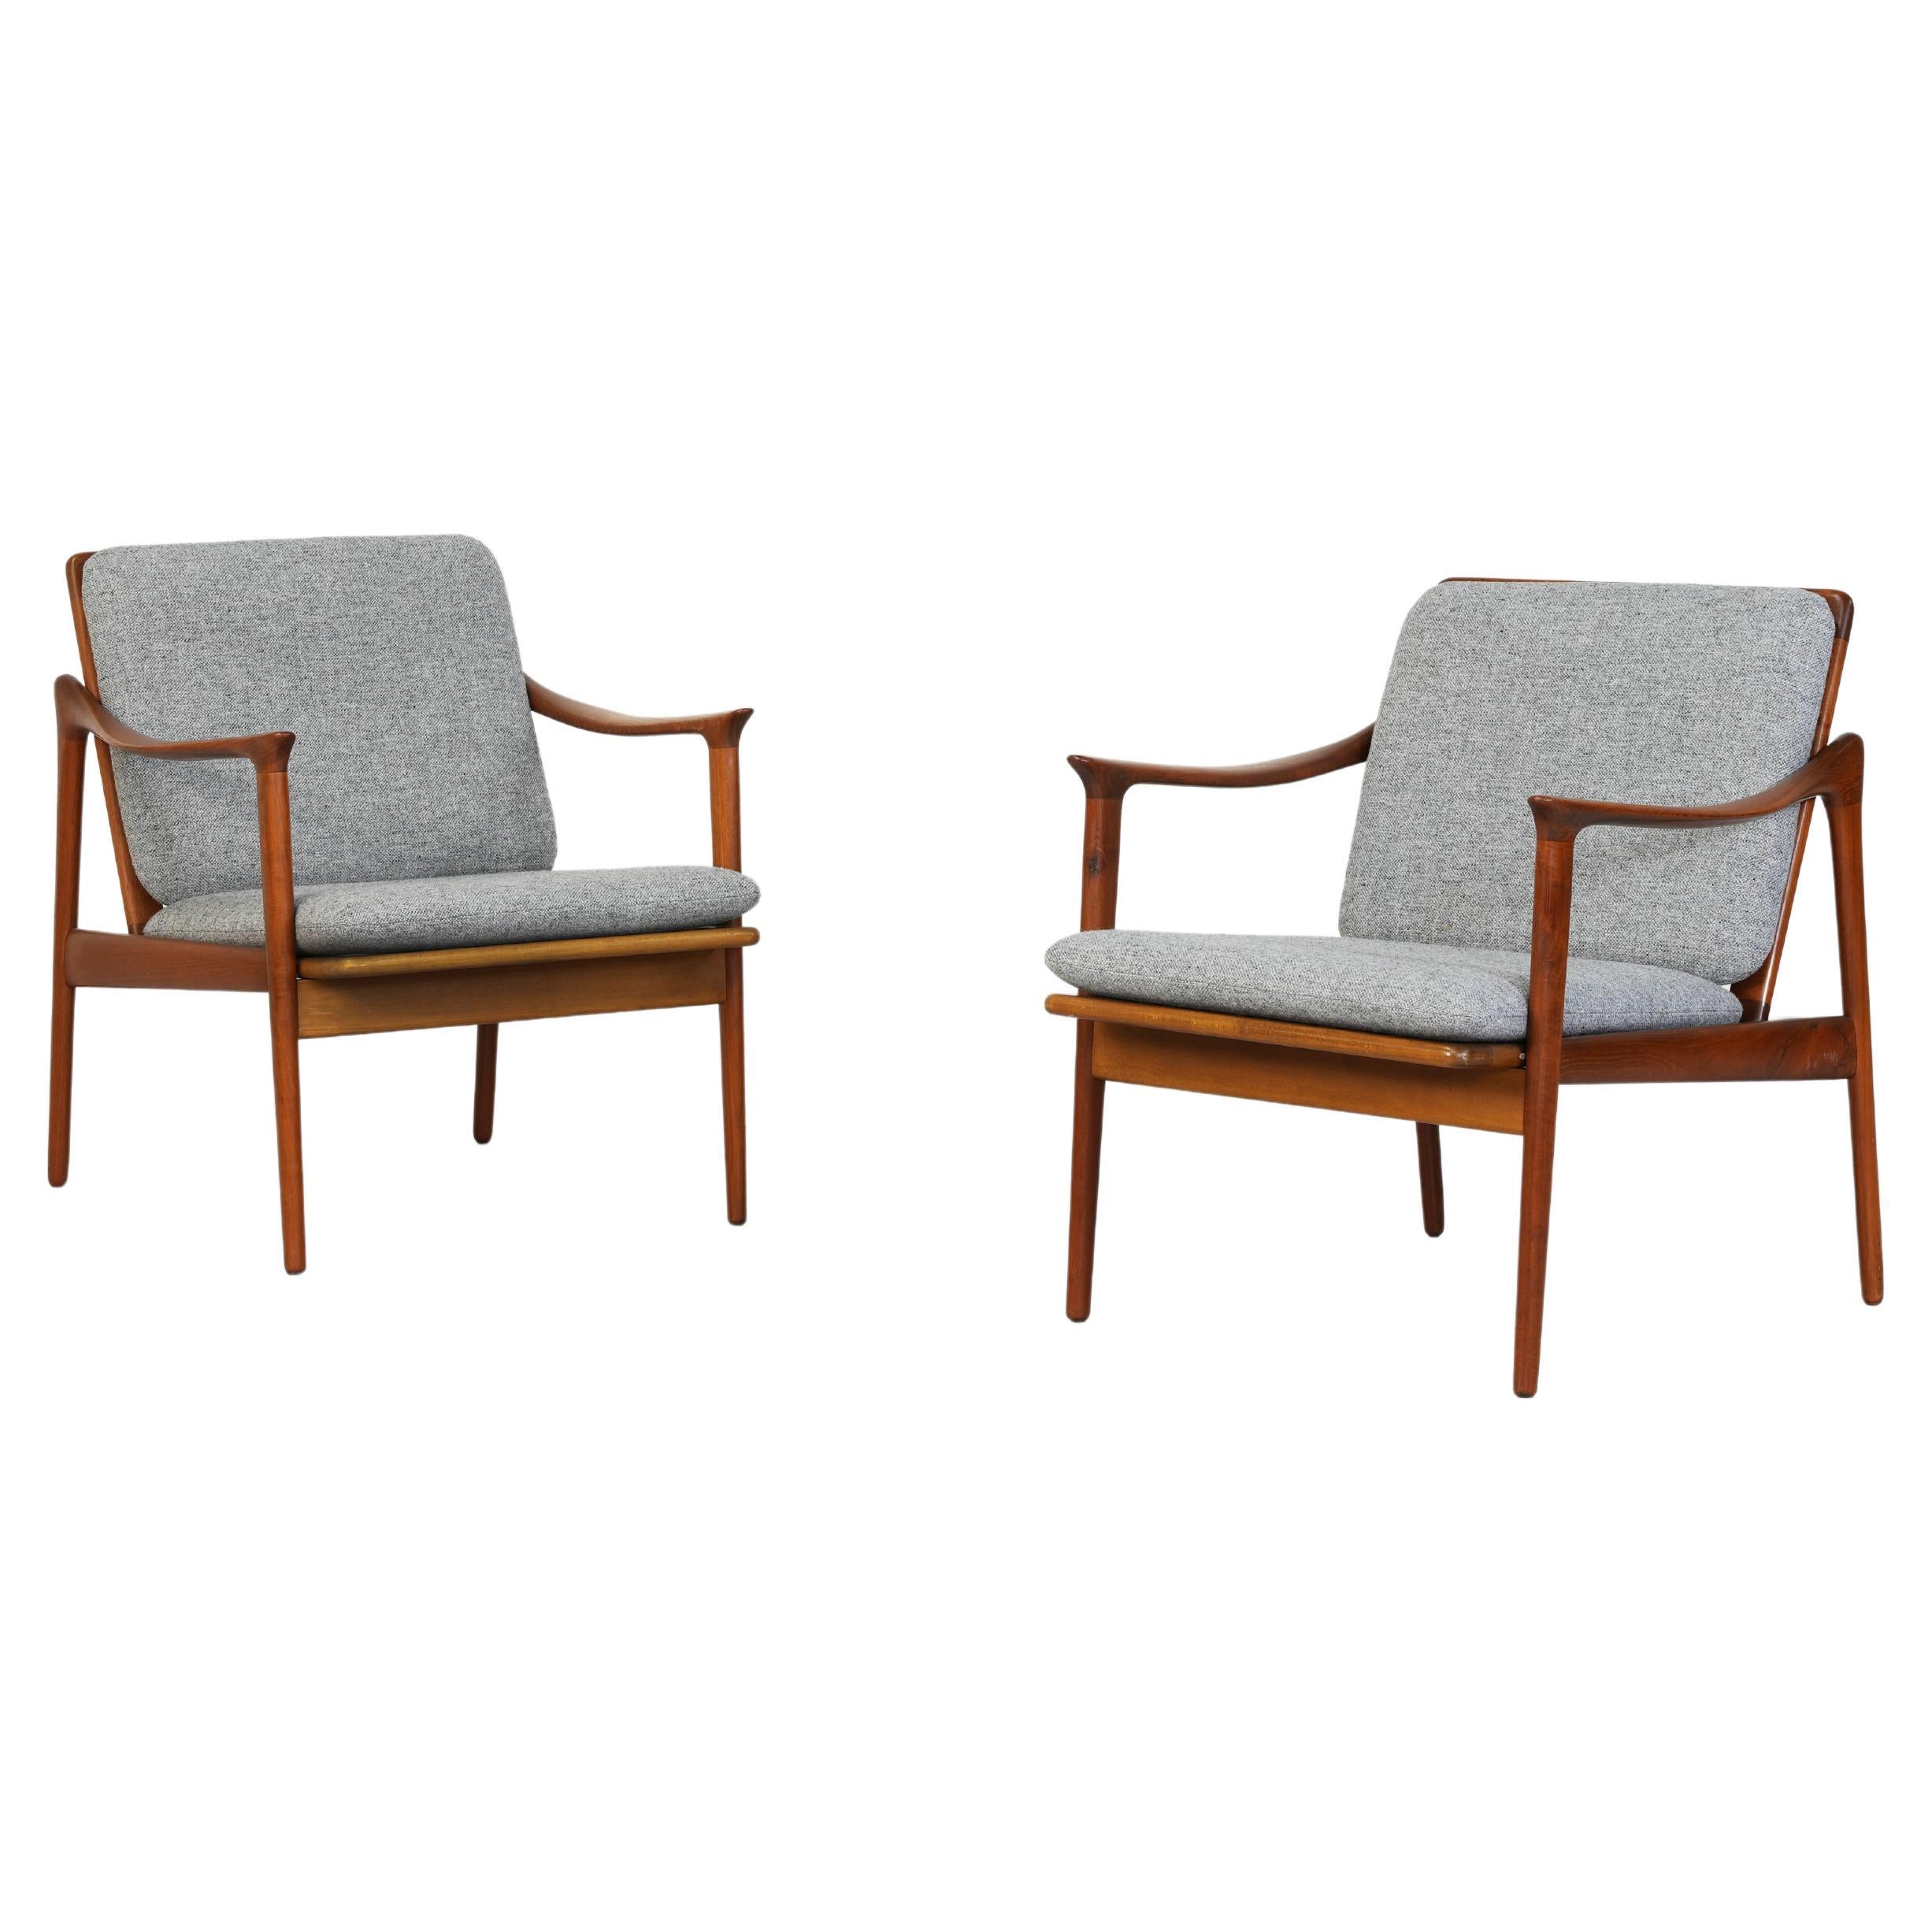 Pair of Lounge Easy Chairs by Frederik Kayser for Vatne Mobler, Norwary 1960ies For Sale